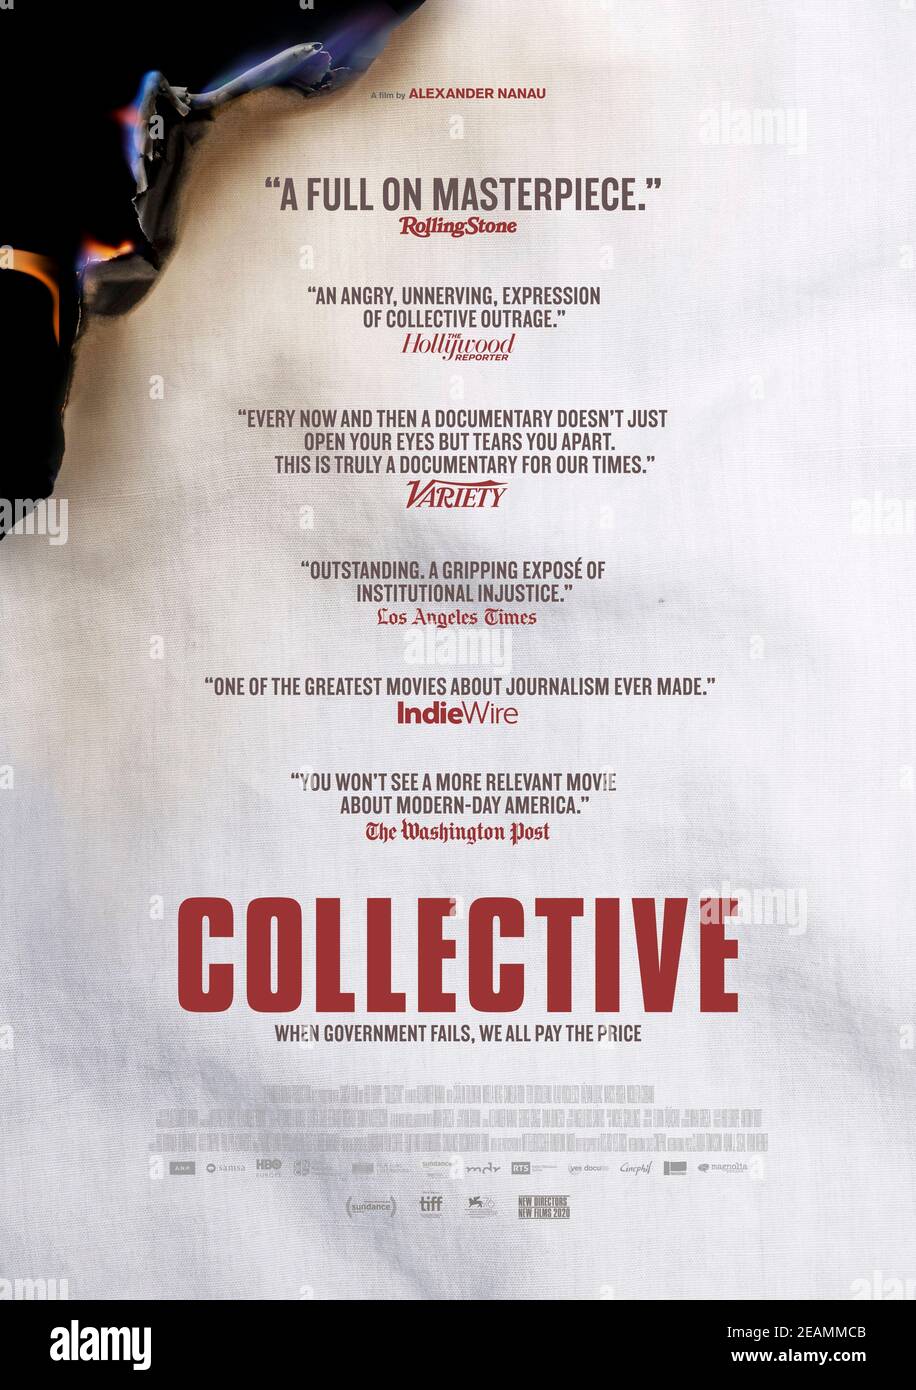 Collective (2019) directed by Alexander Nanau and starring Razvan Lutac, Mirela Neag and Catalin Tolontan. Documentary about investigators at a Romanian newspaper as they try to uncover a vast health-care fraud and led to the deaths of innocent citizens. Stock Photo